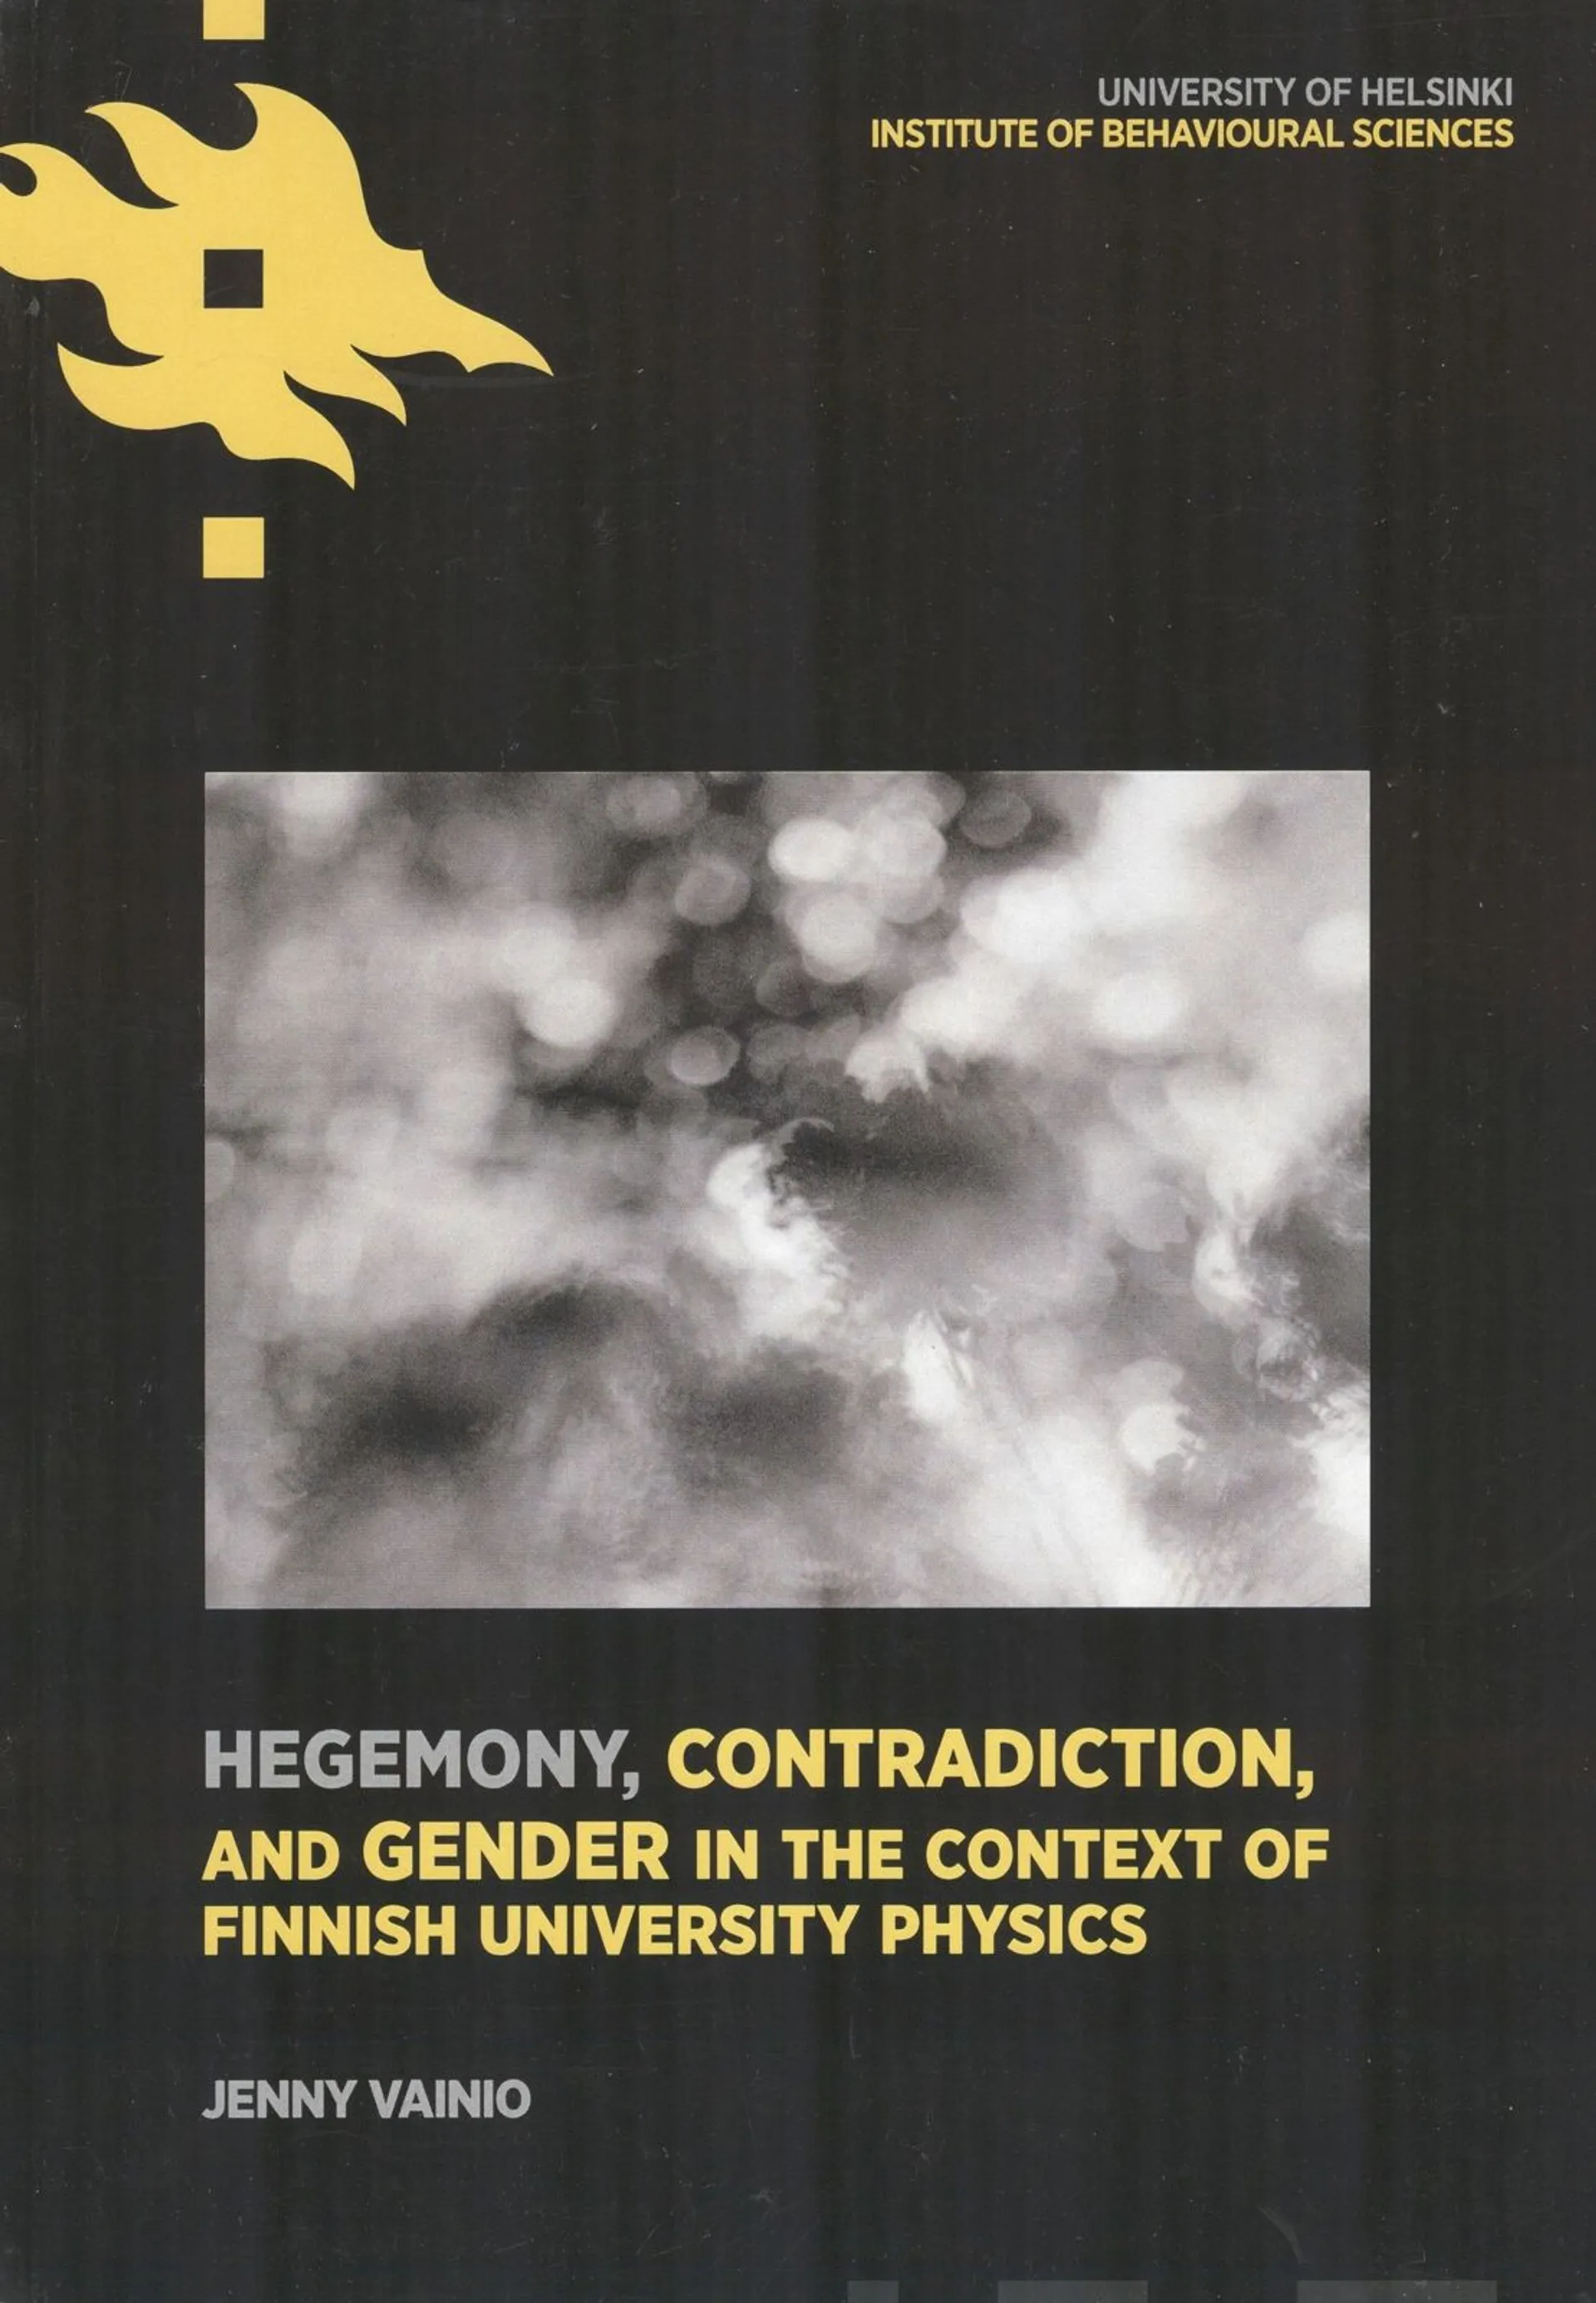 Vainio, Hegemony, contradiction, and gender in the context of Finnish university physics